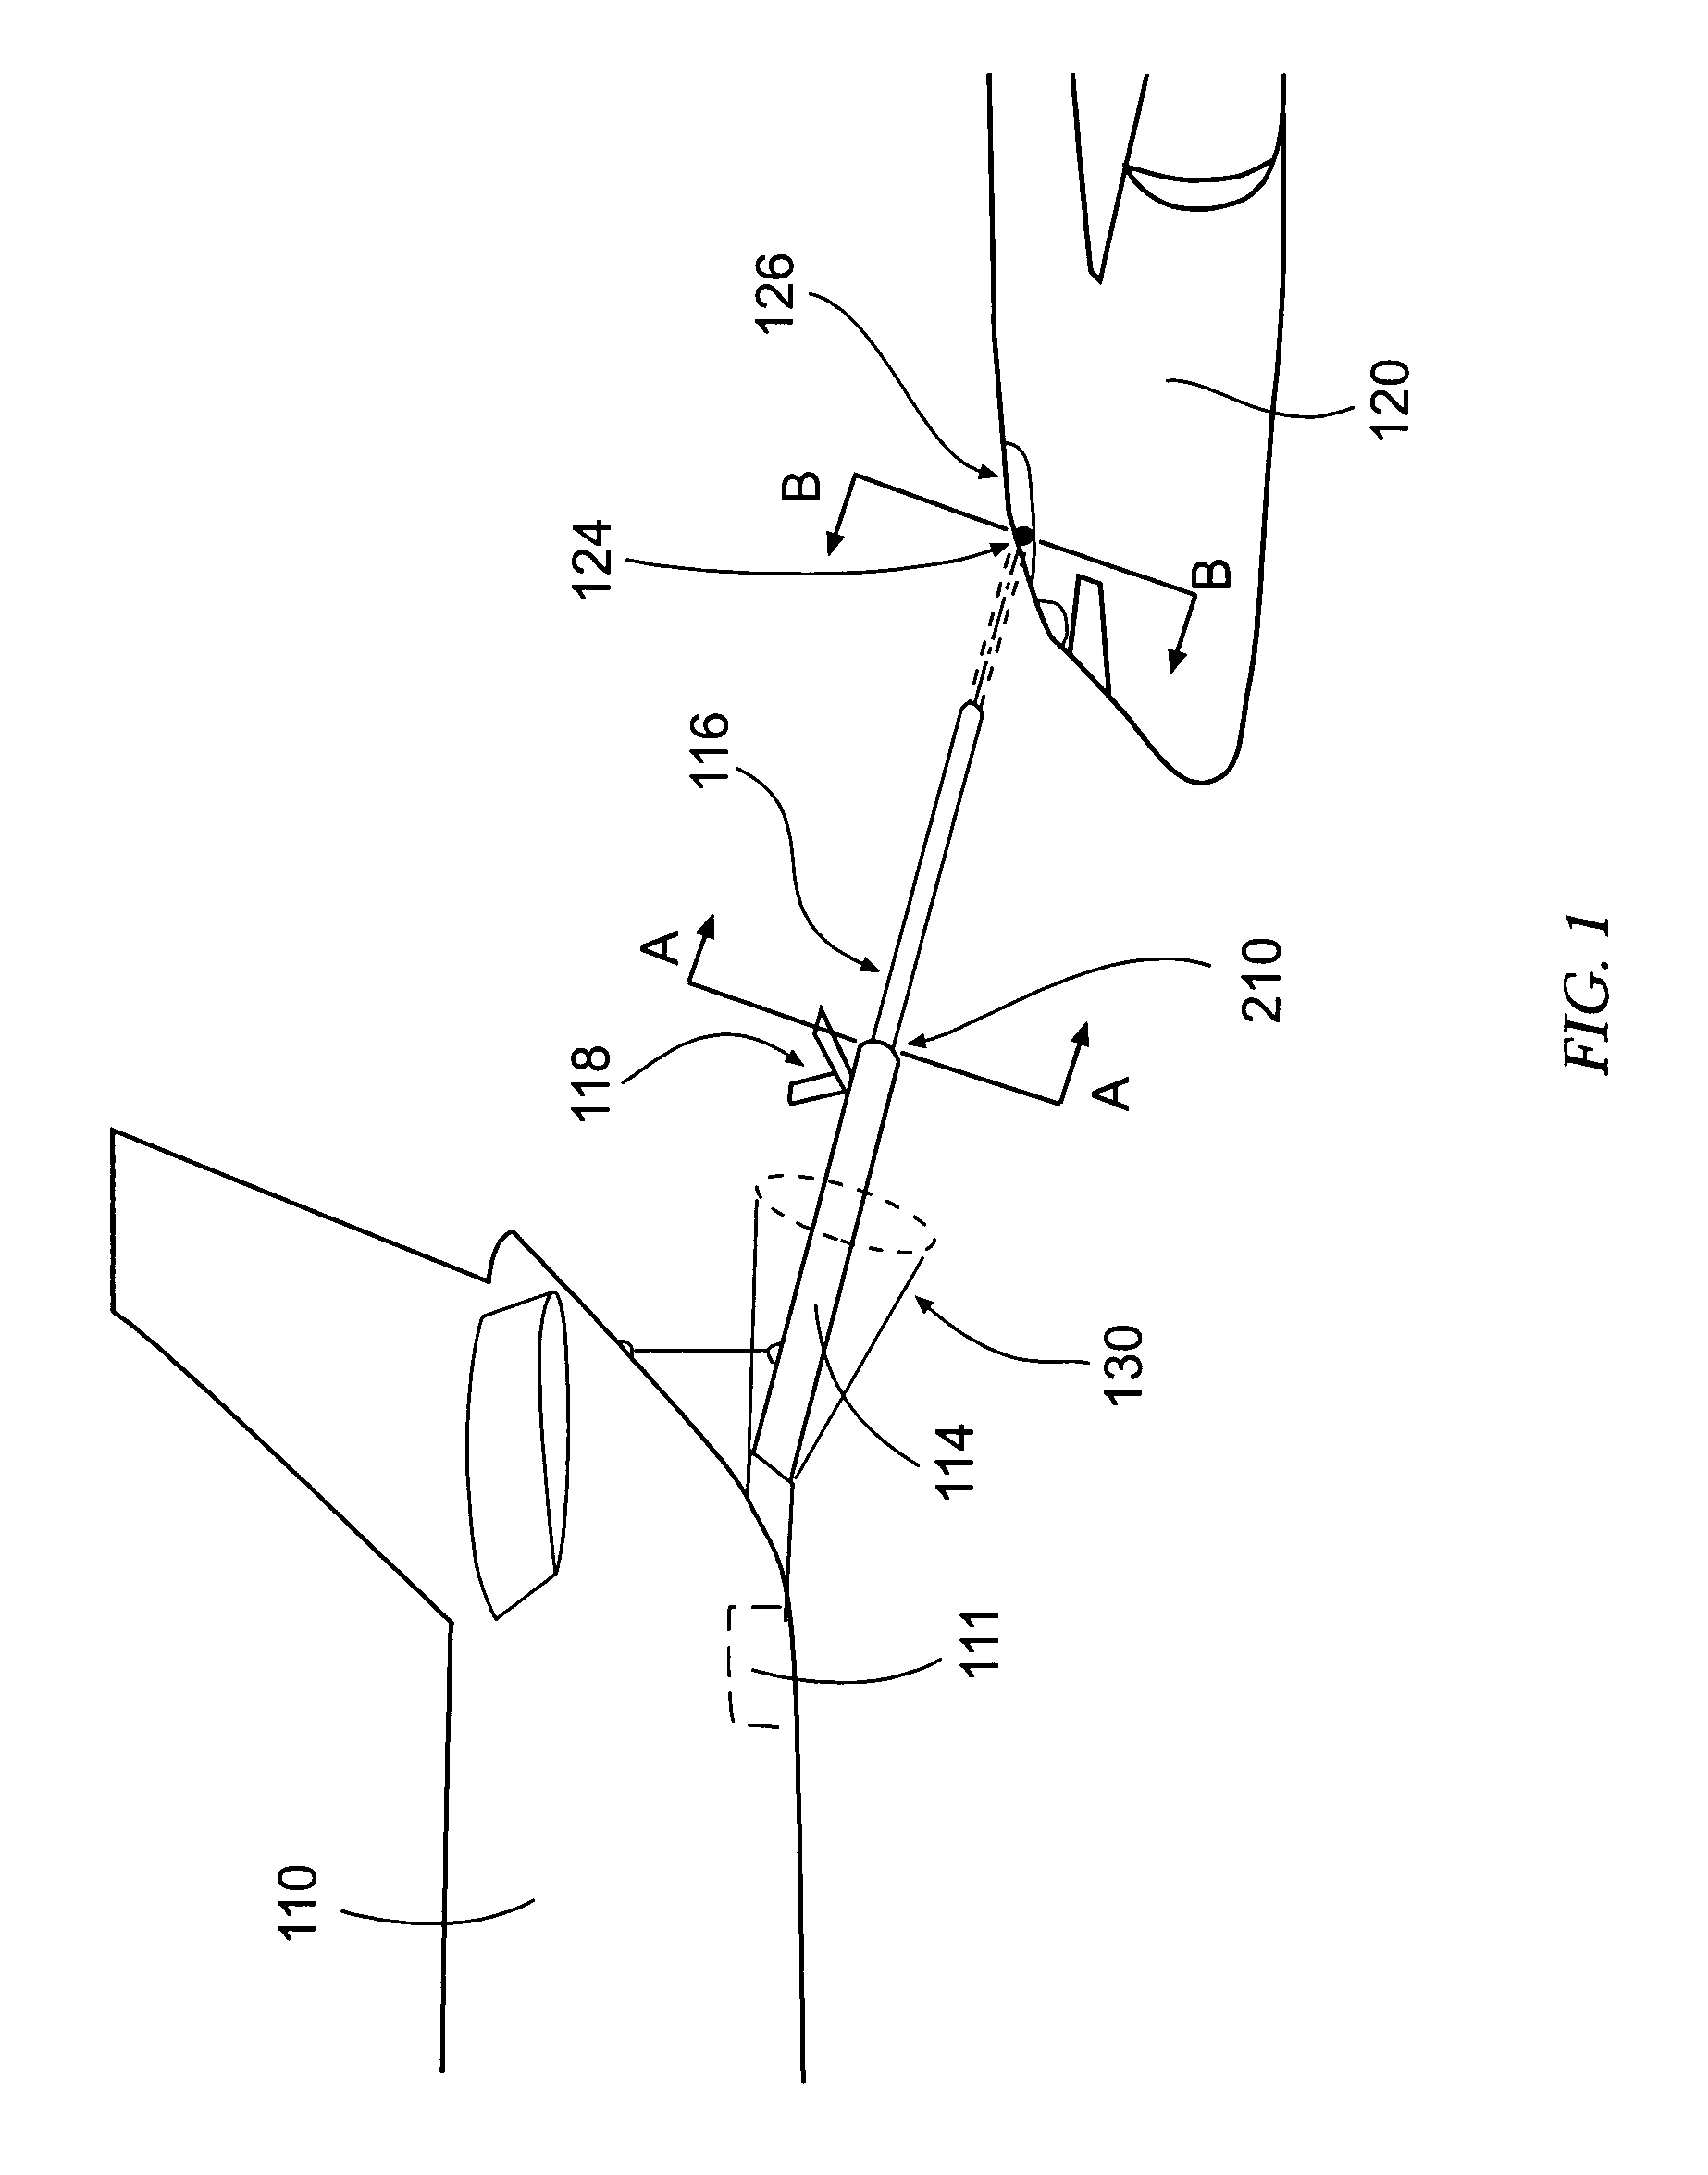 In-flight refueling system, alignment system, and method for automatic alignment and engagement of an in-flight refueling boom